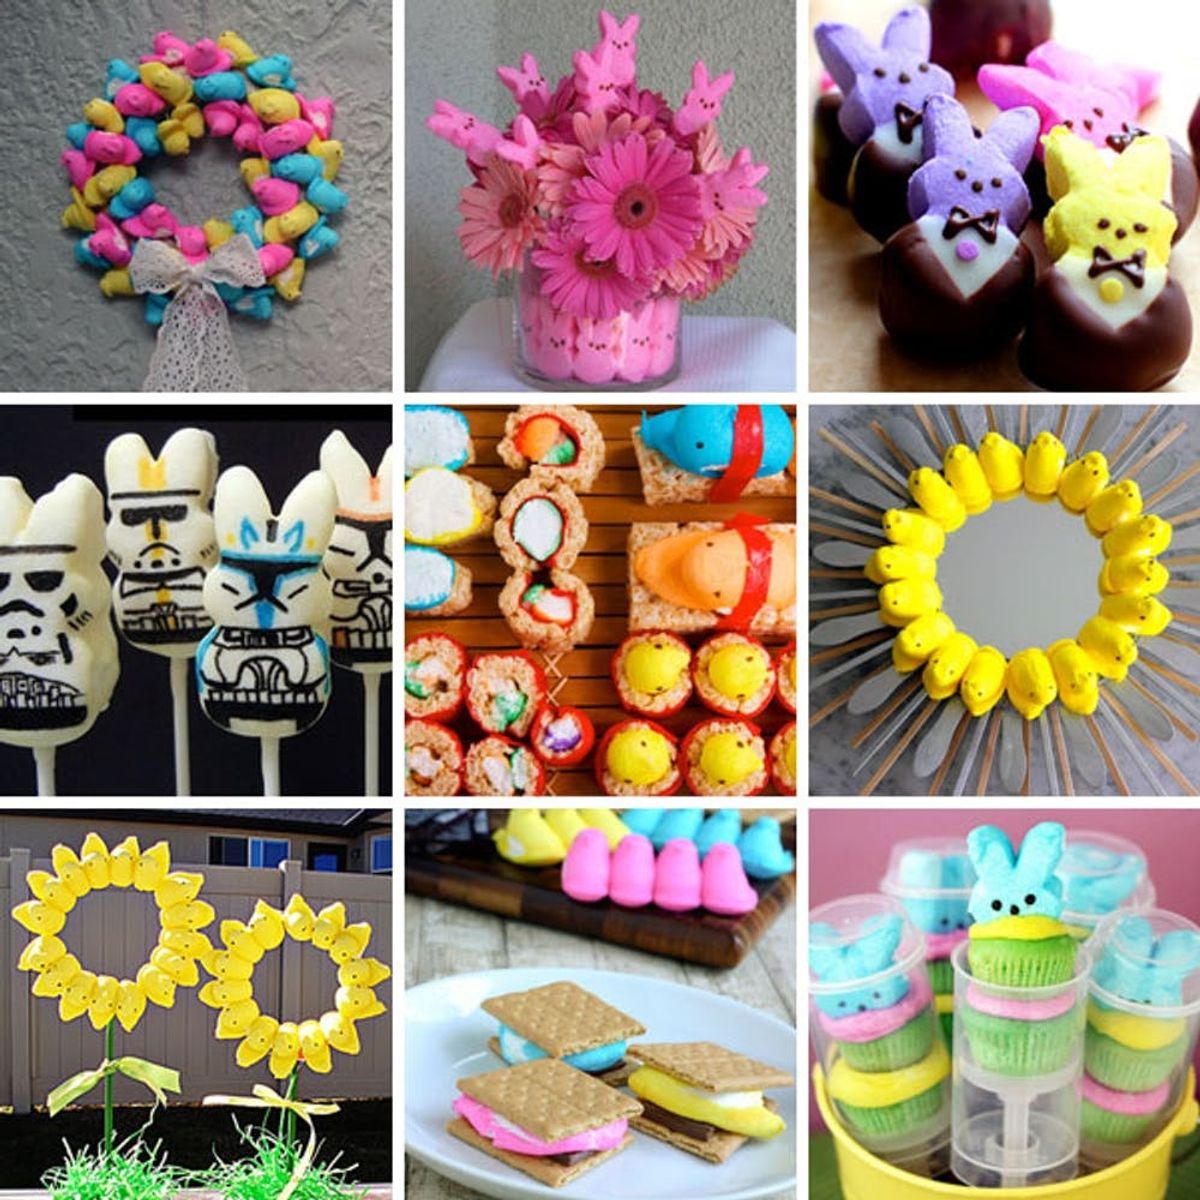 9 Ways to Play with Peeps